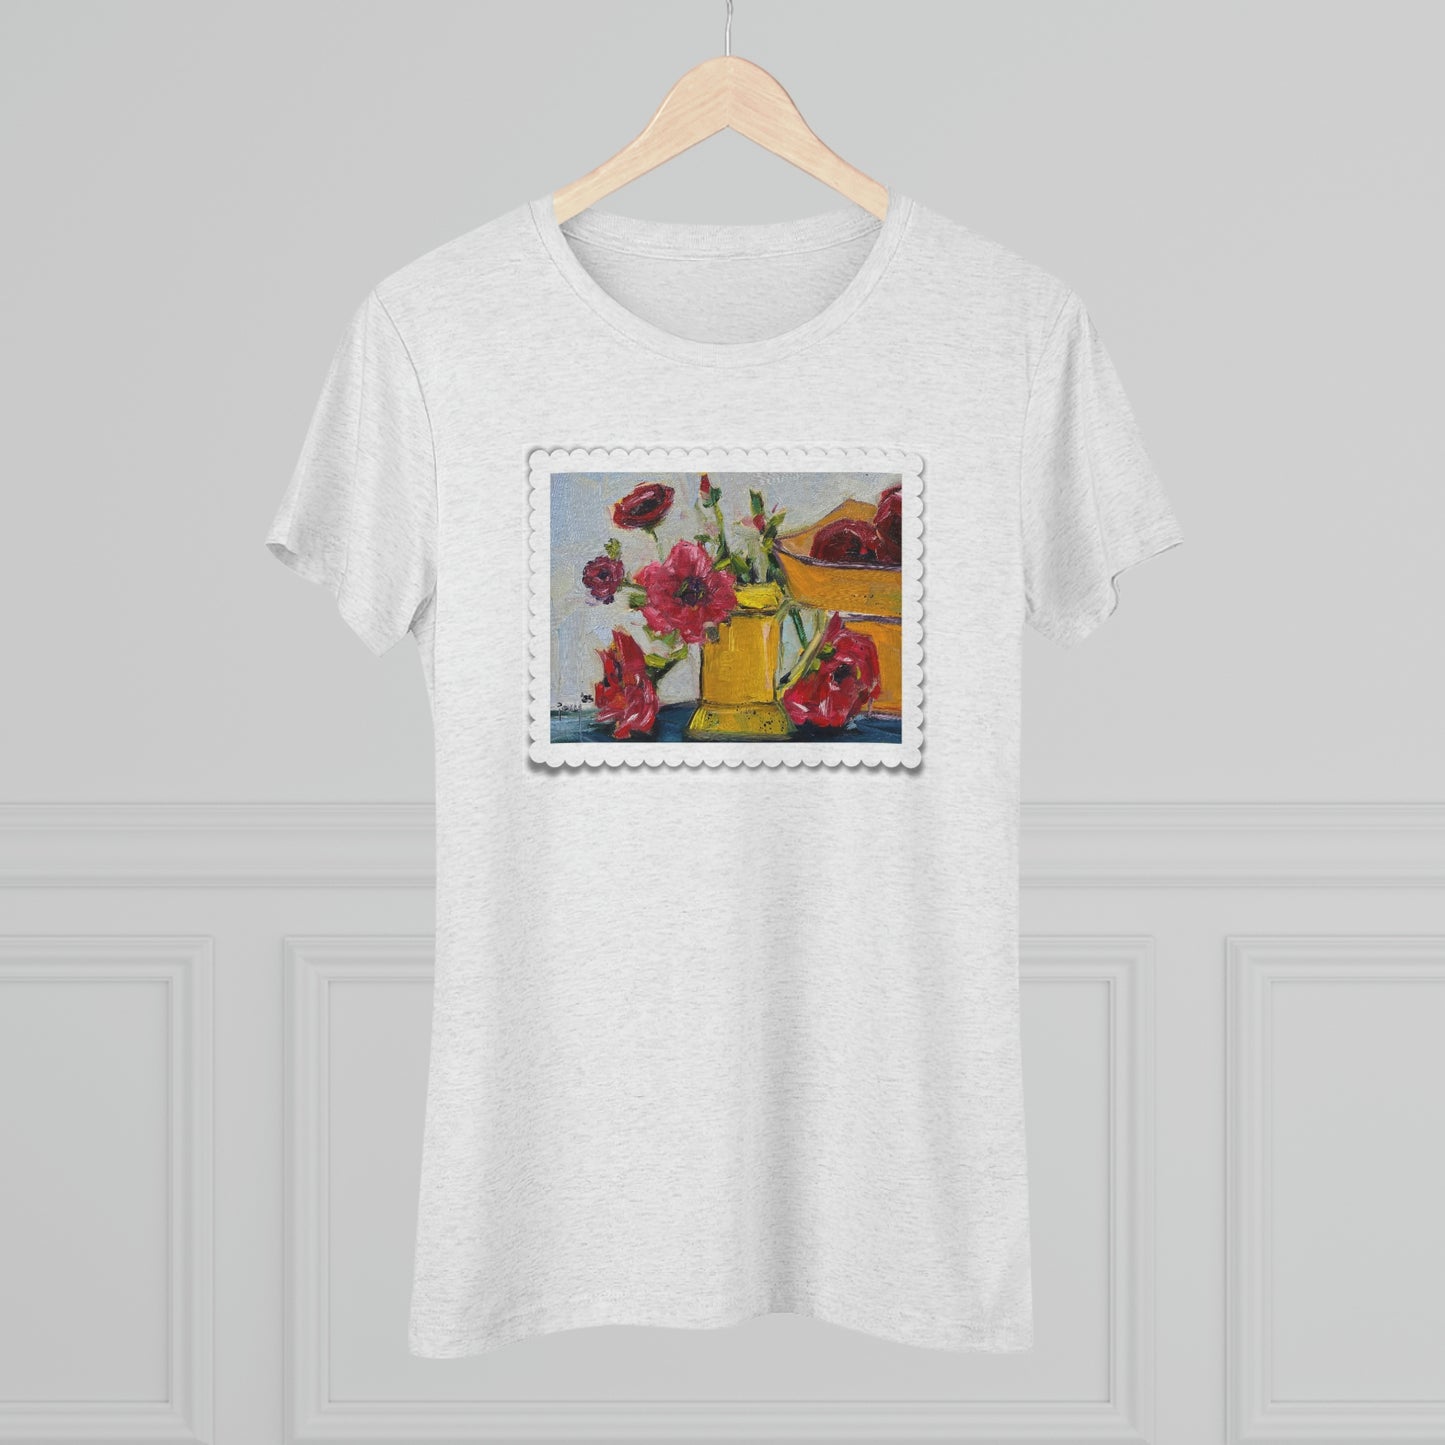 Ranunculas and Pomegranates Women's fitted Triblend Tee  tee shirt